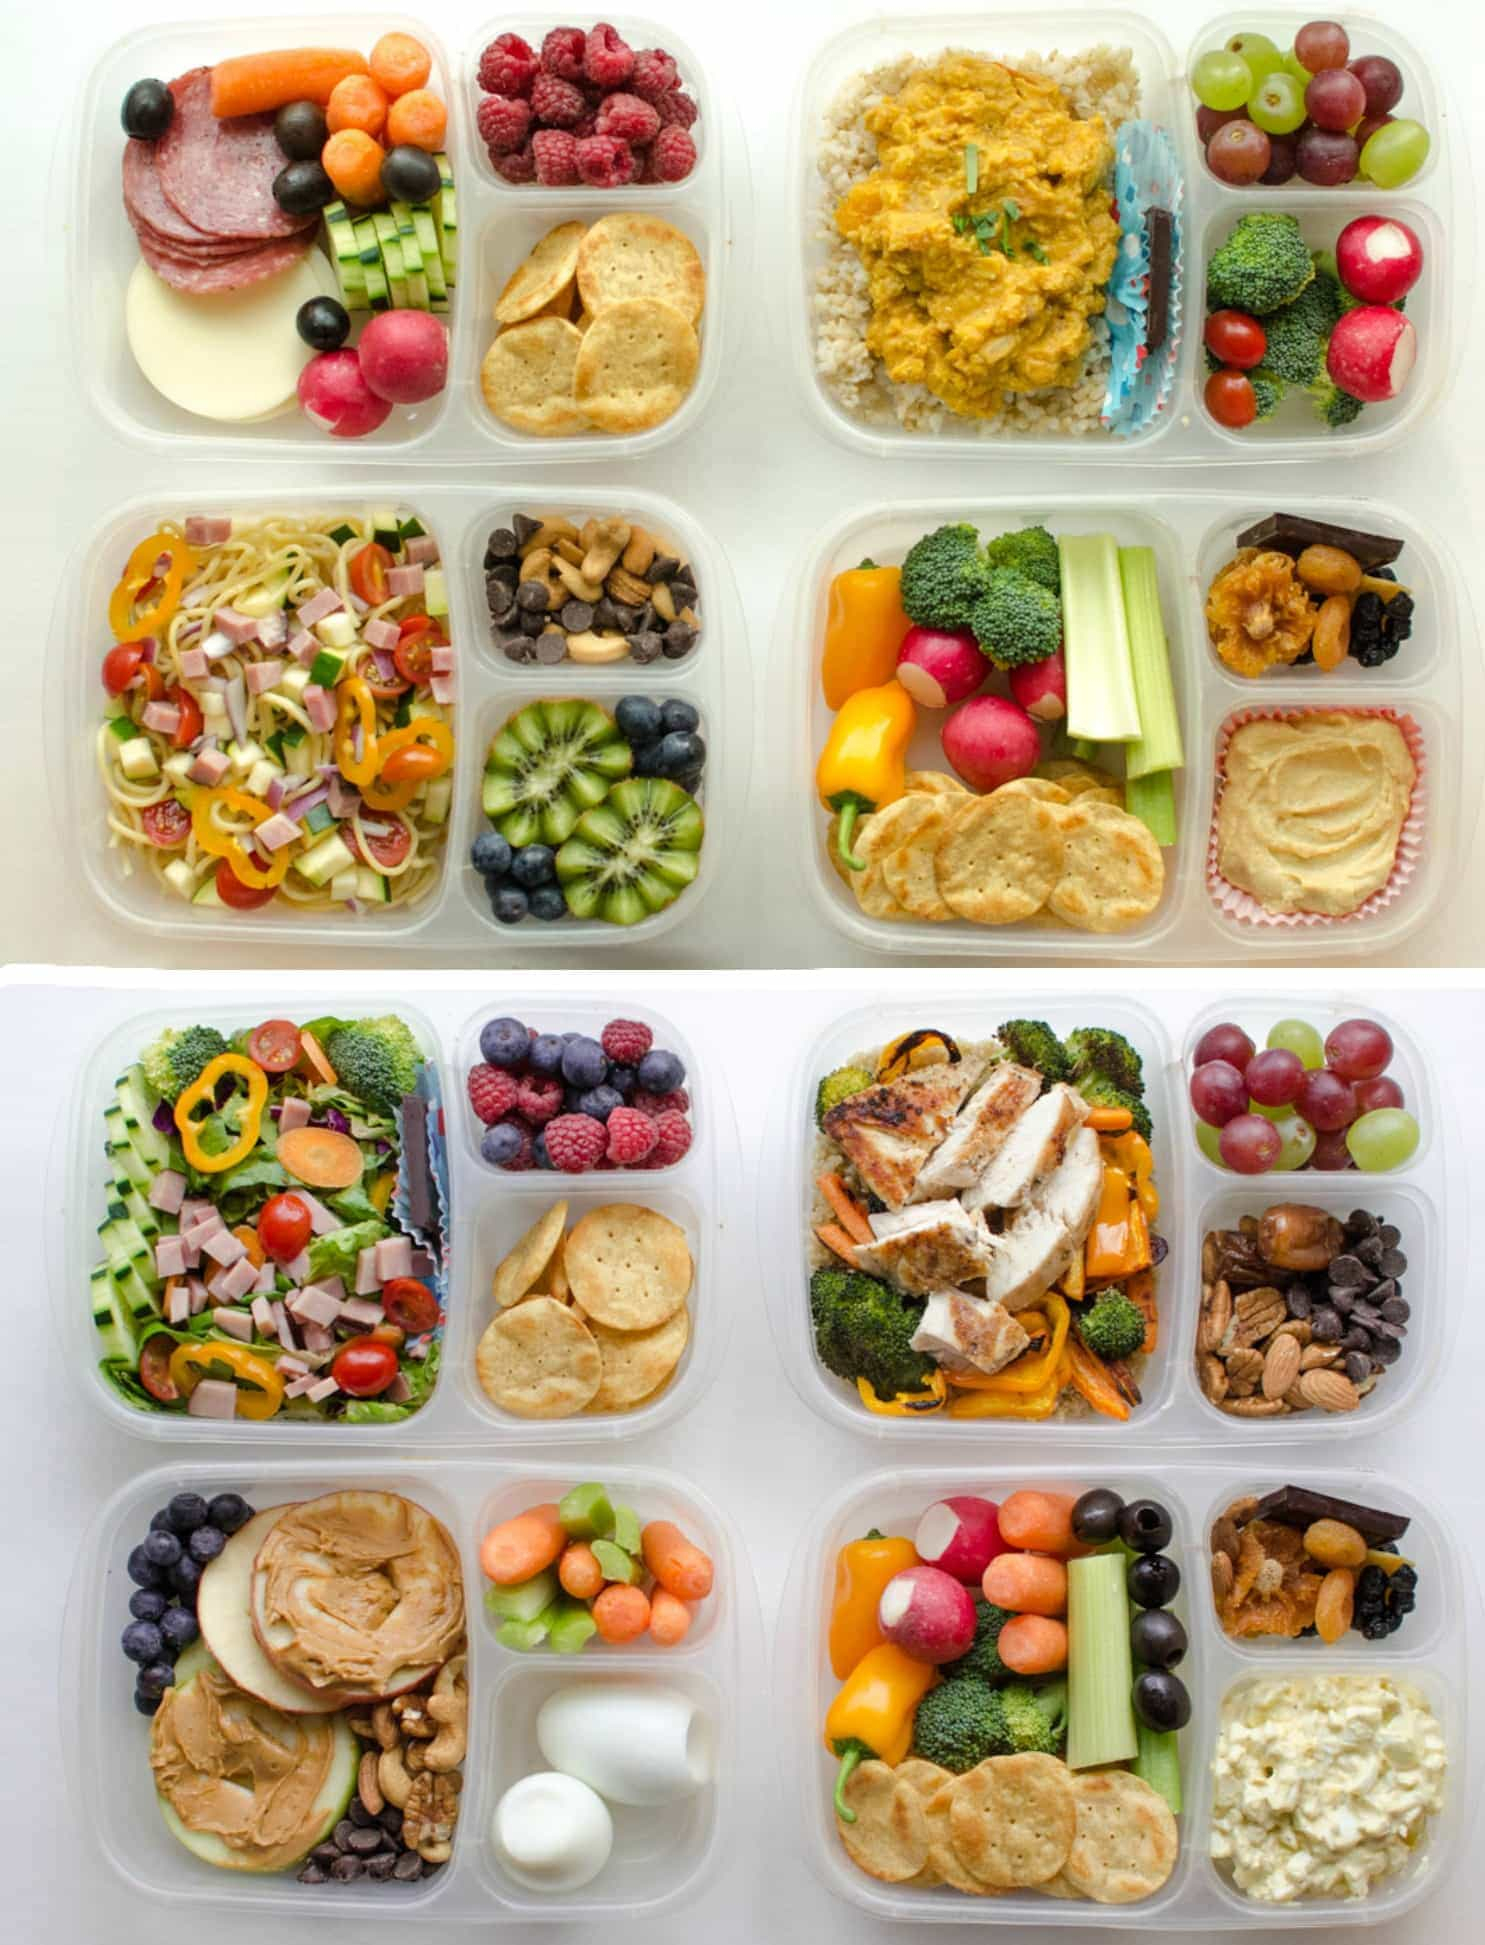 10 Most Recommended Bento Lunch Box Ideas For Adults 8 adult lunch box ideas healthy easy work lunch ideas 1 2022